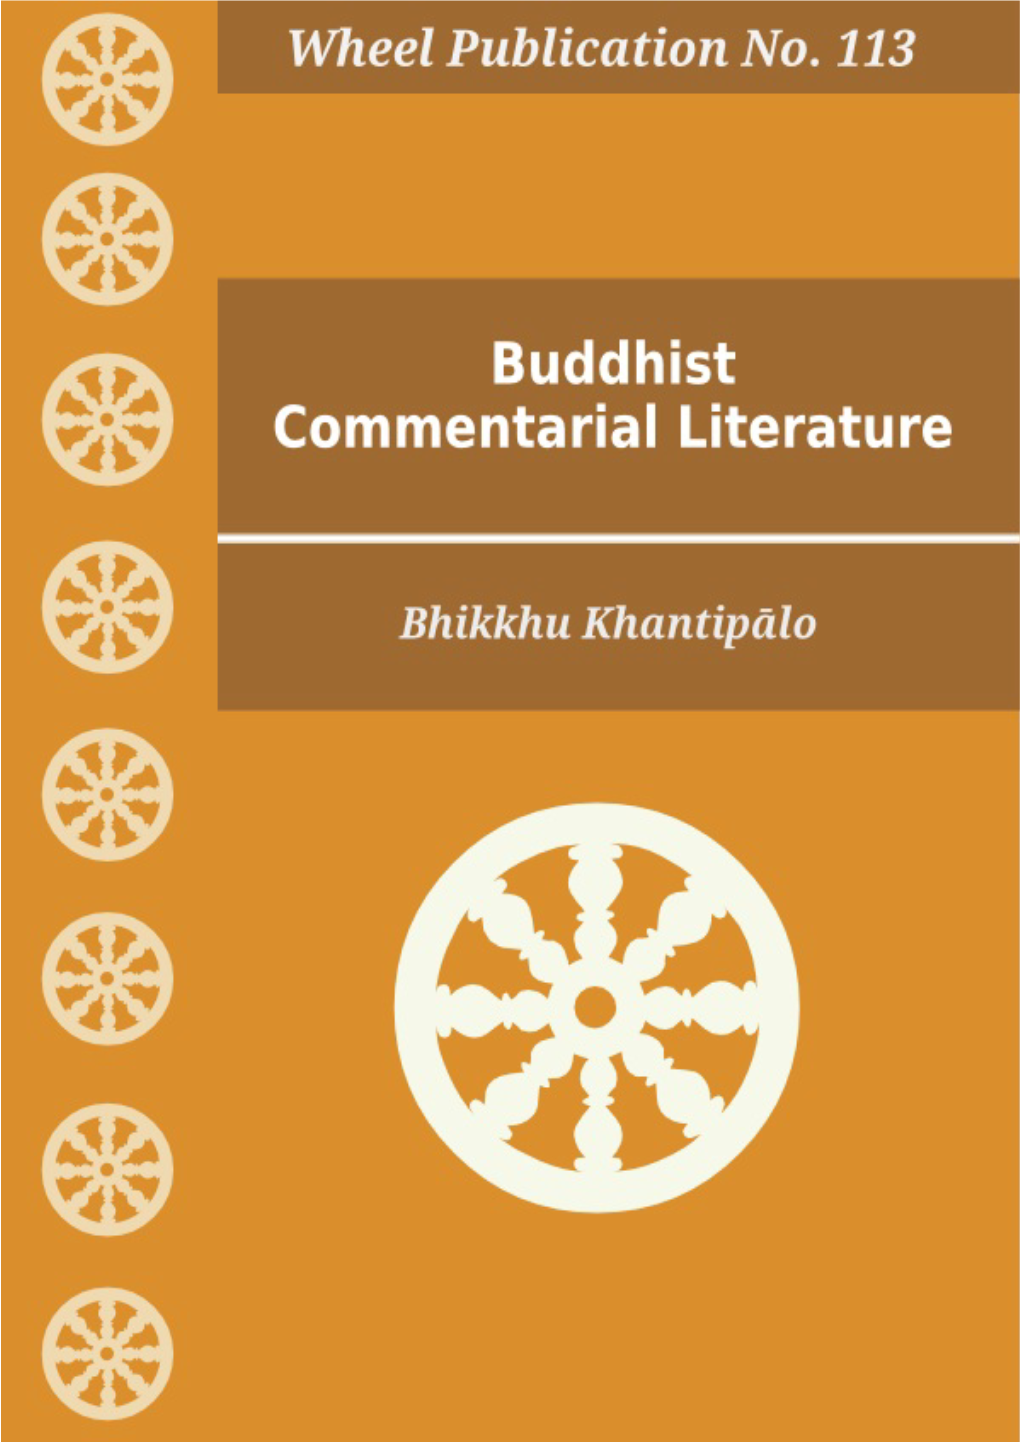 Wh 113. Buddhist Commentarial Literature